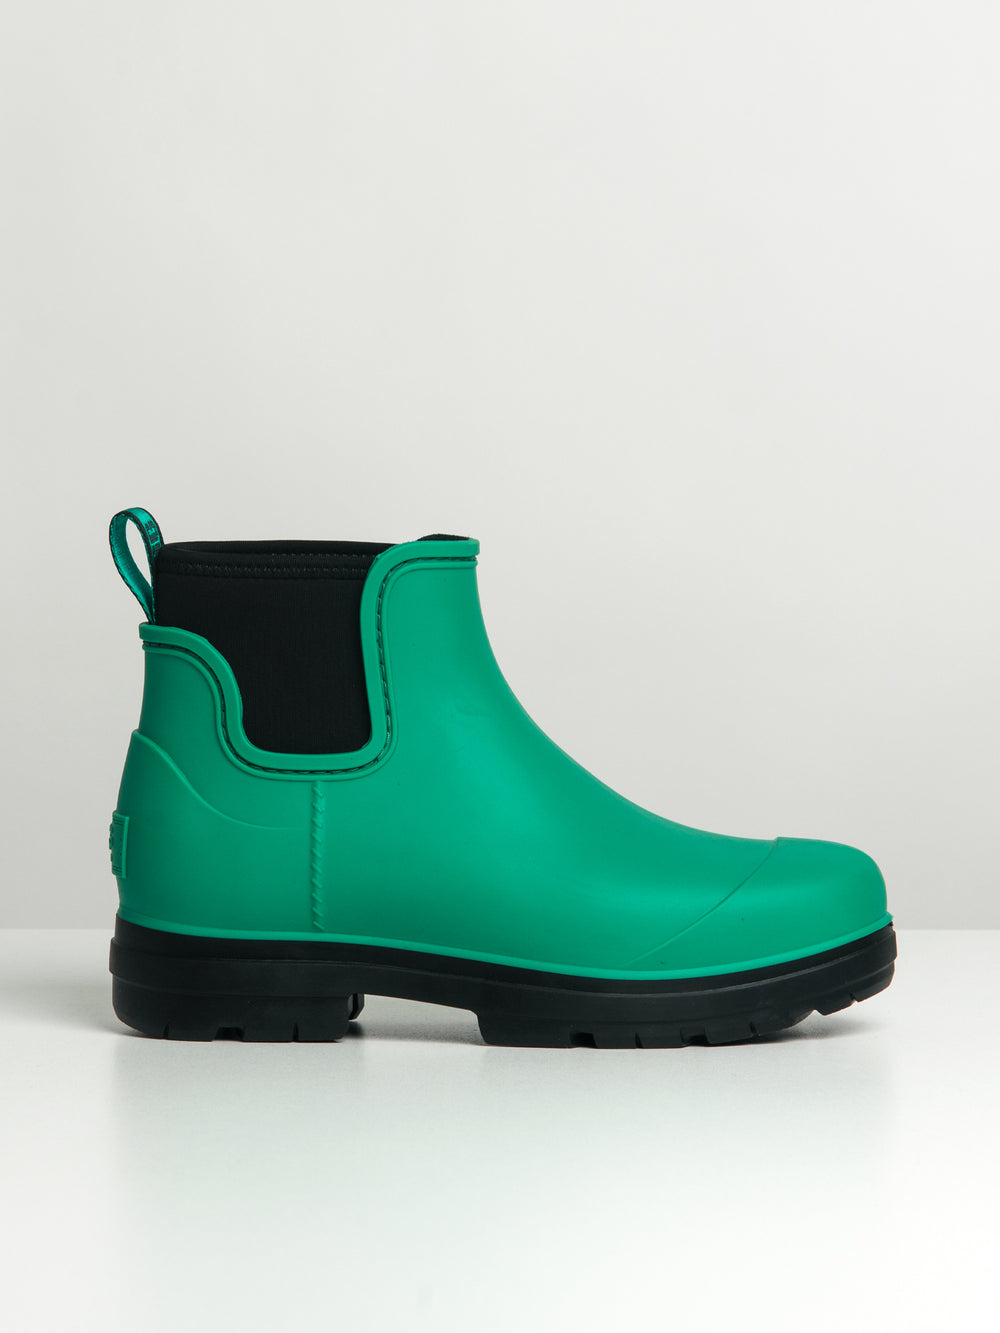 WOMENS UGG DROPLET BOOT - CLEARANCE